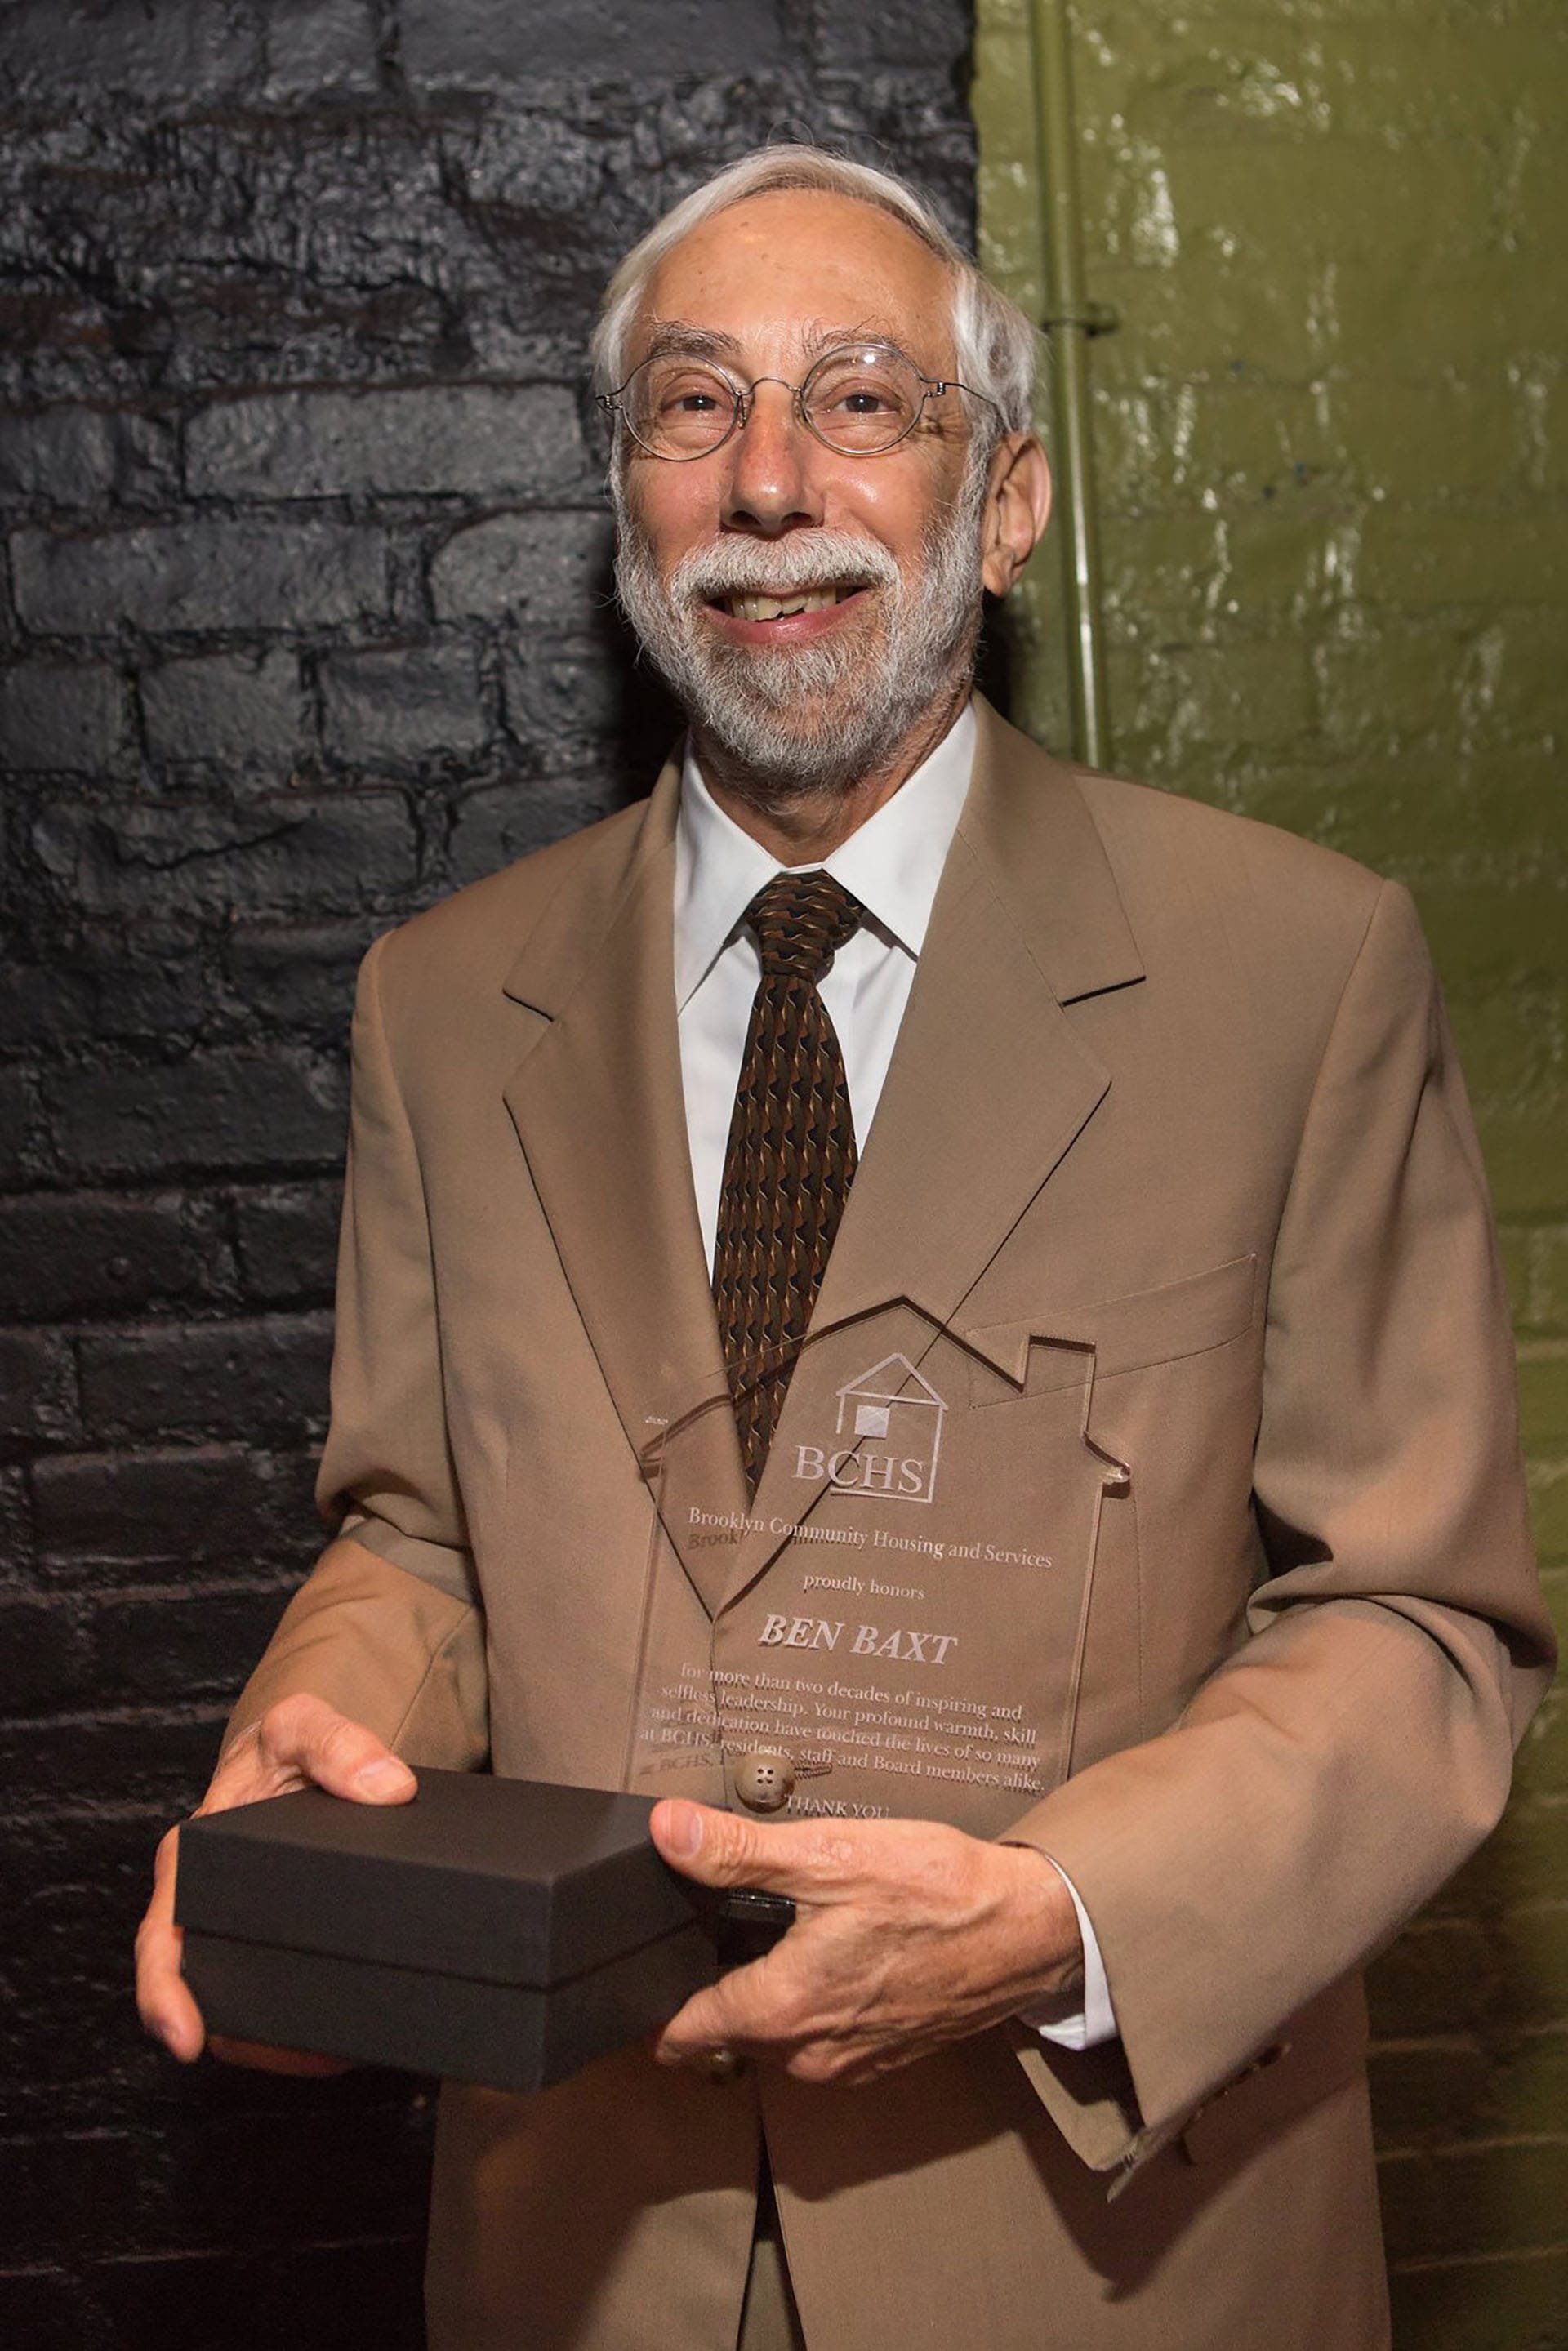 Ben Baxt holding the award he received at the 2015 Brooklyn Community Housing and Services Gala.